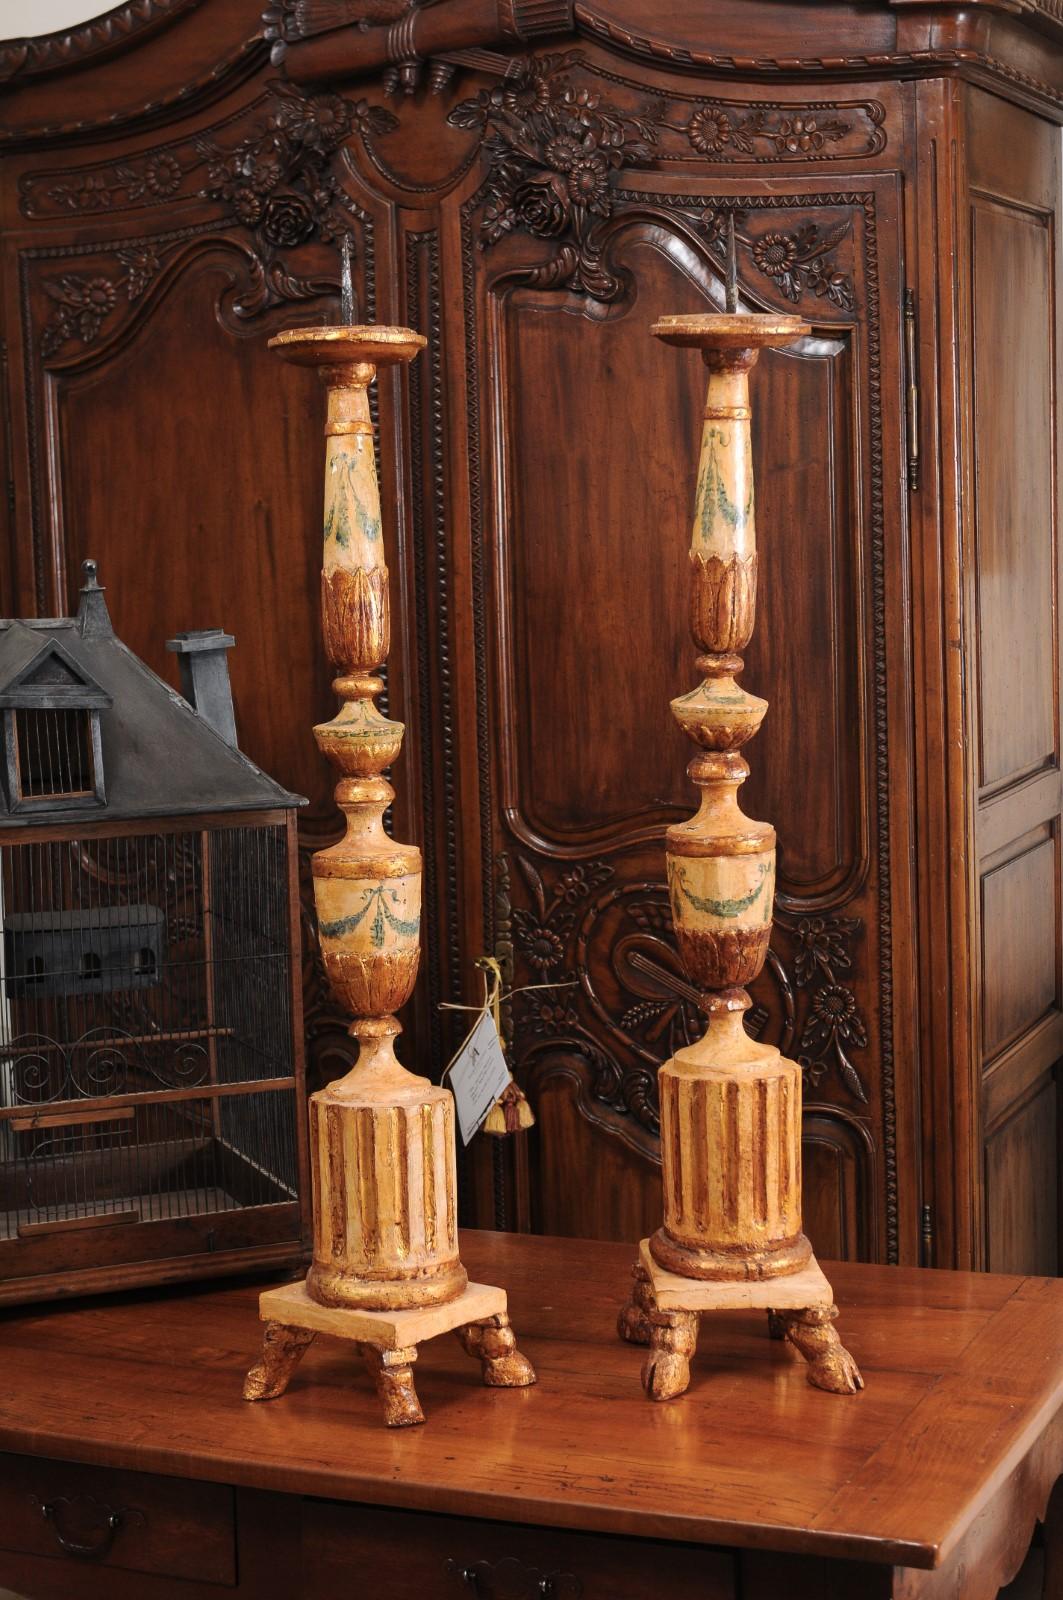 A pair of Italian neoclassical period painted and gilded candlesticks from the 18th century, with fluted motifs and hoof feet. Created in Italy during the later years of the 18th century, each of this pair of candlesticks features a painted body